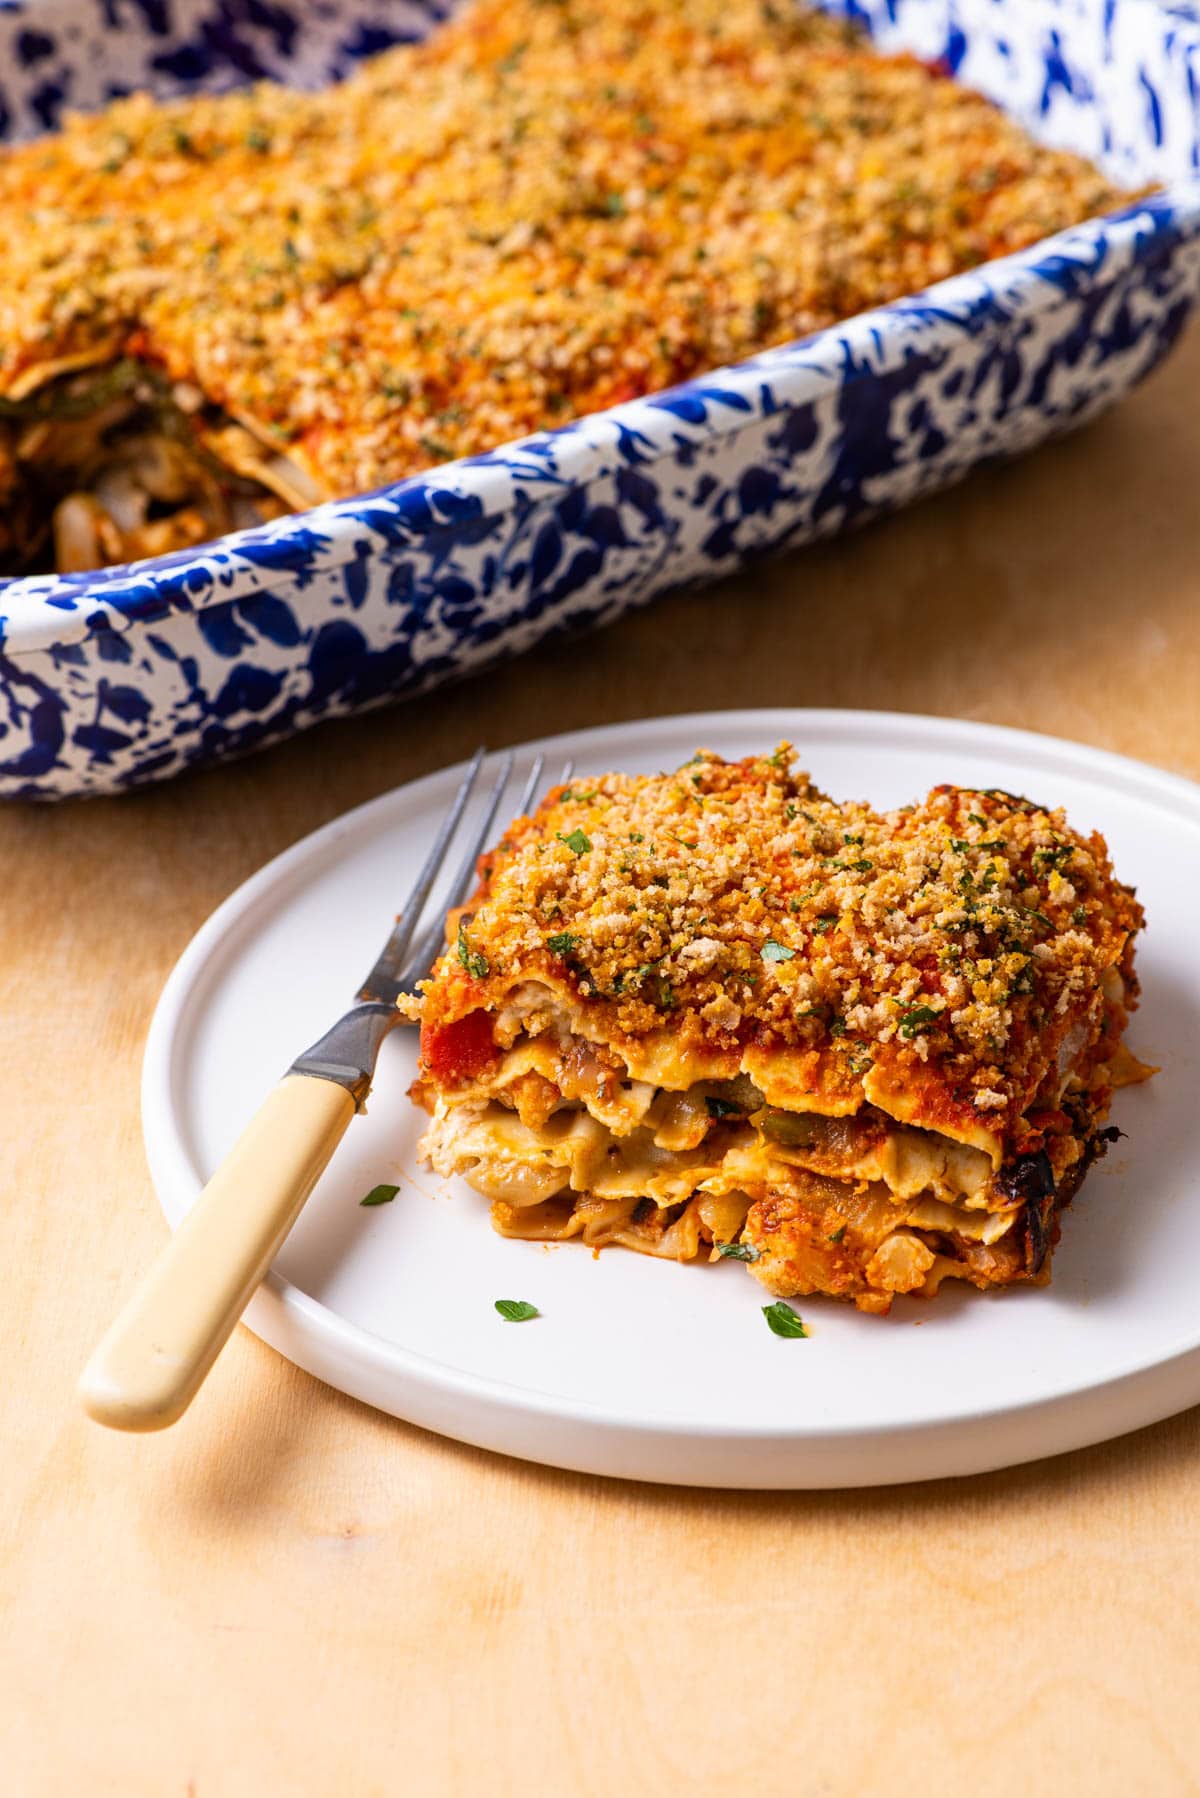 A vegan vegetable lasagna in a blue speckled casserole dish on a wooden table with white wine and a stack of plates.